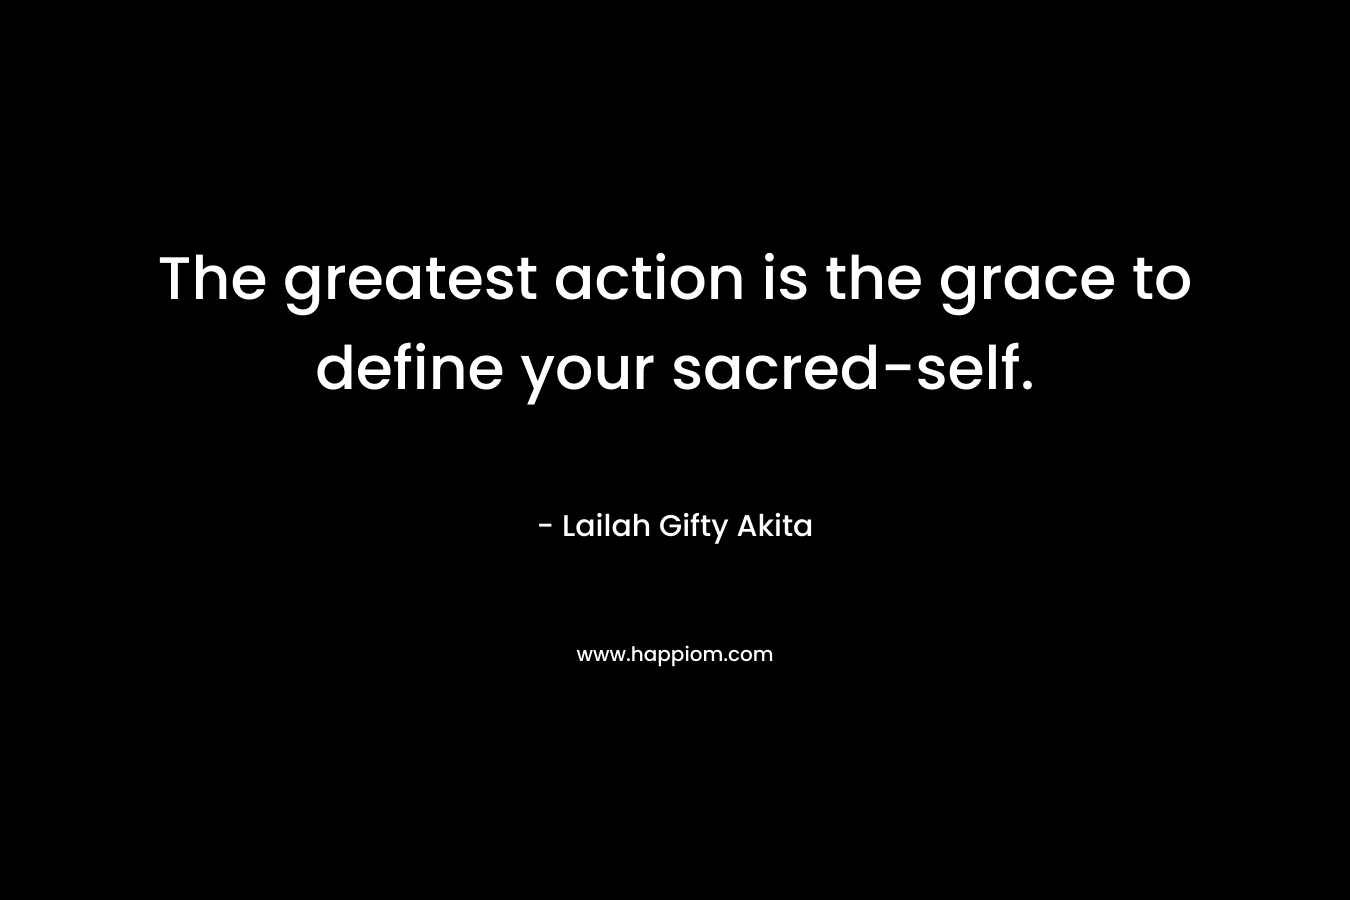 The greatest action is the grace to define your sacred-self.